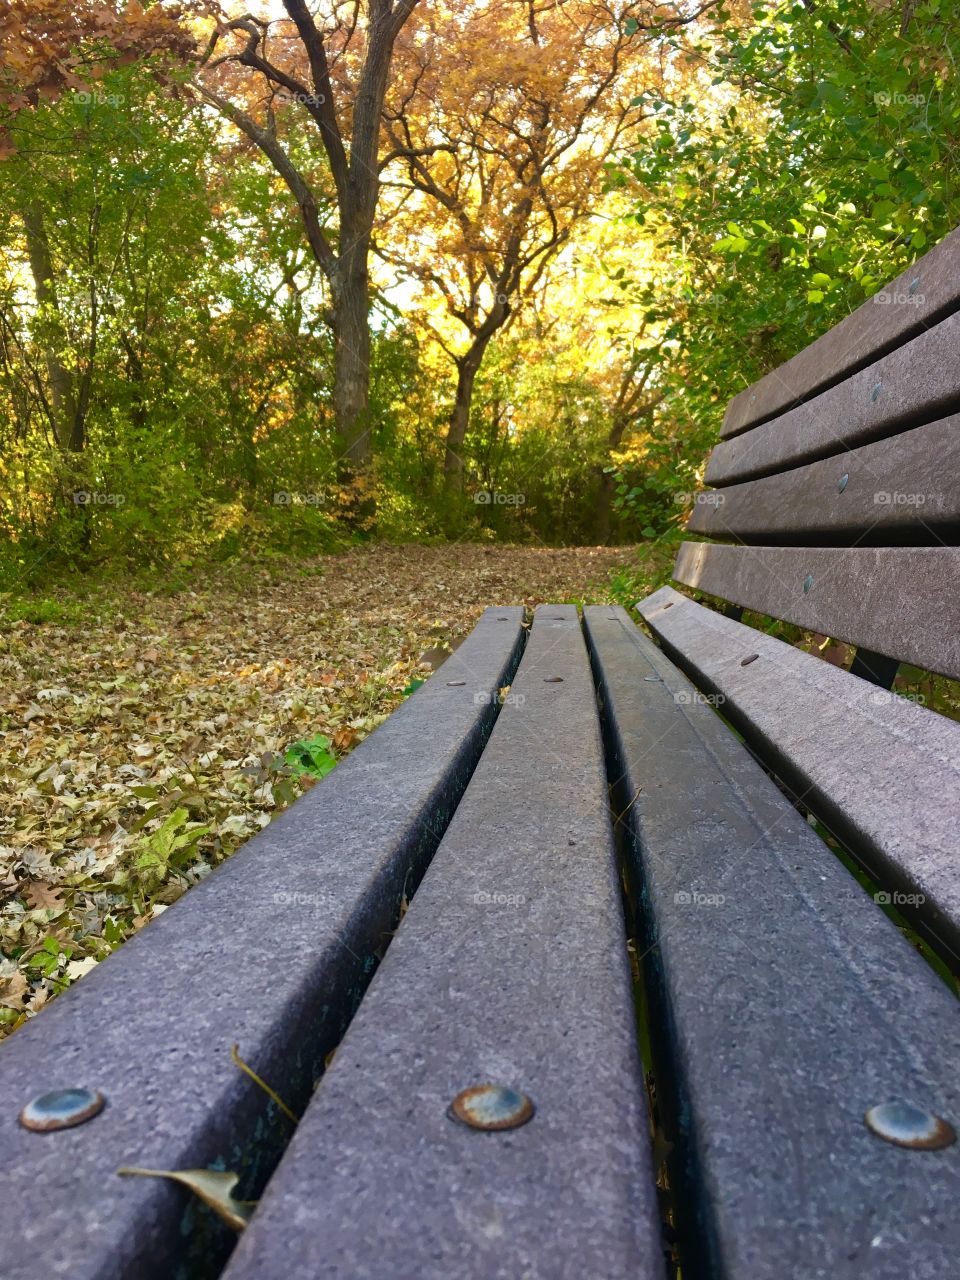 Found a bench to rest on in the park! 